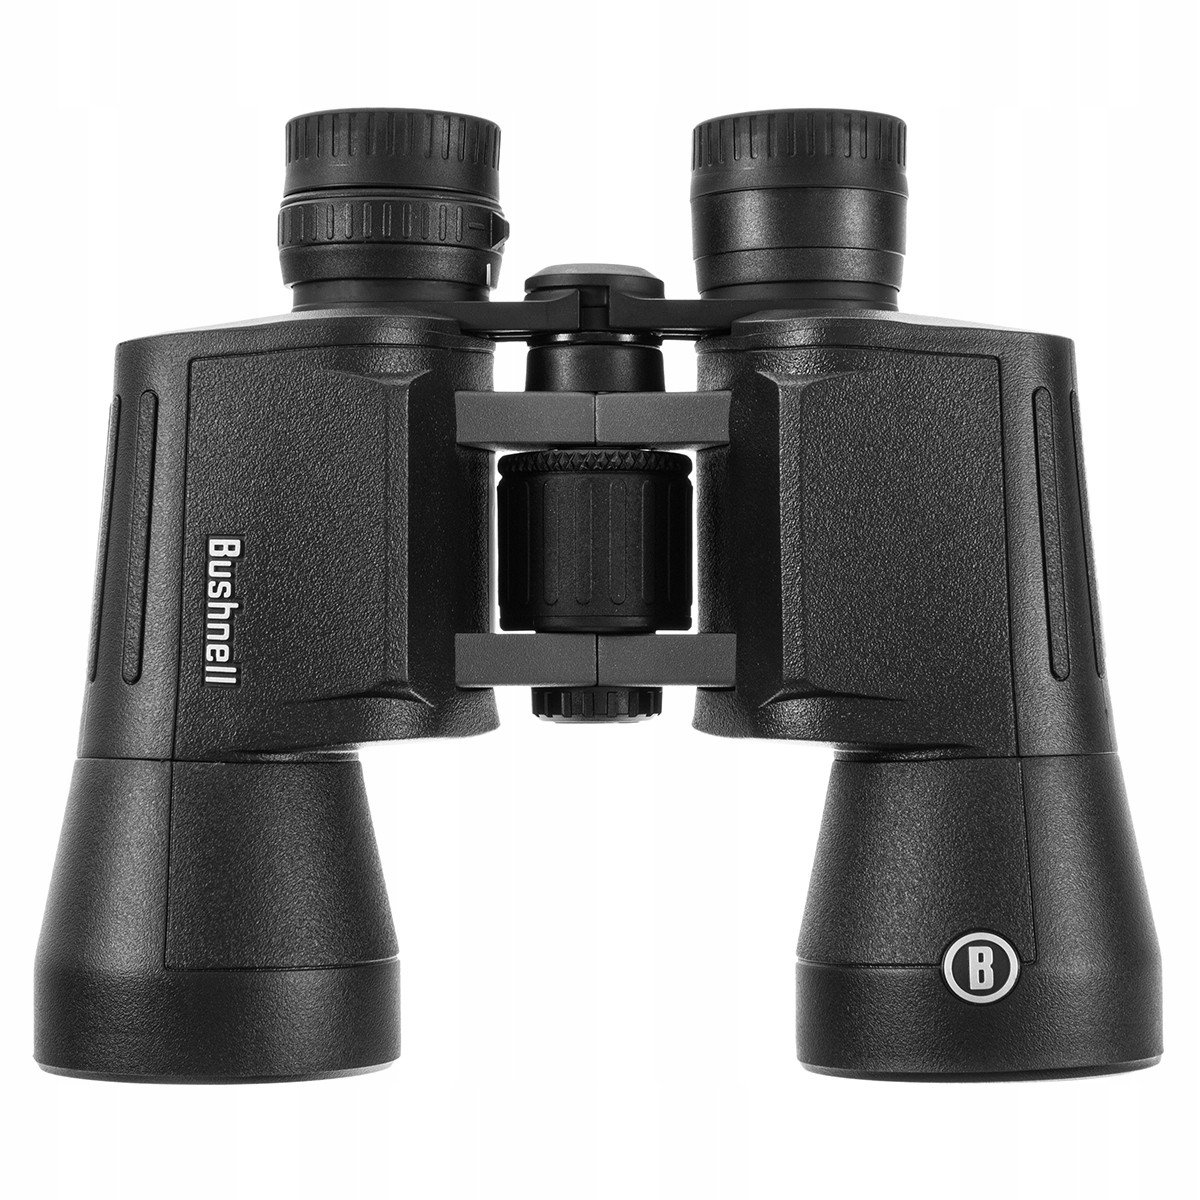 Dalekohled Bushnell PowerView 2.0 10x50